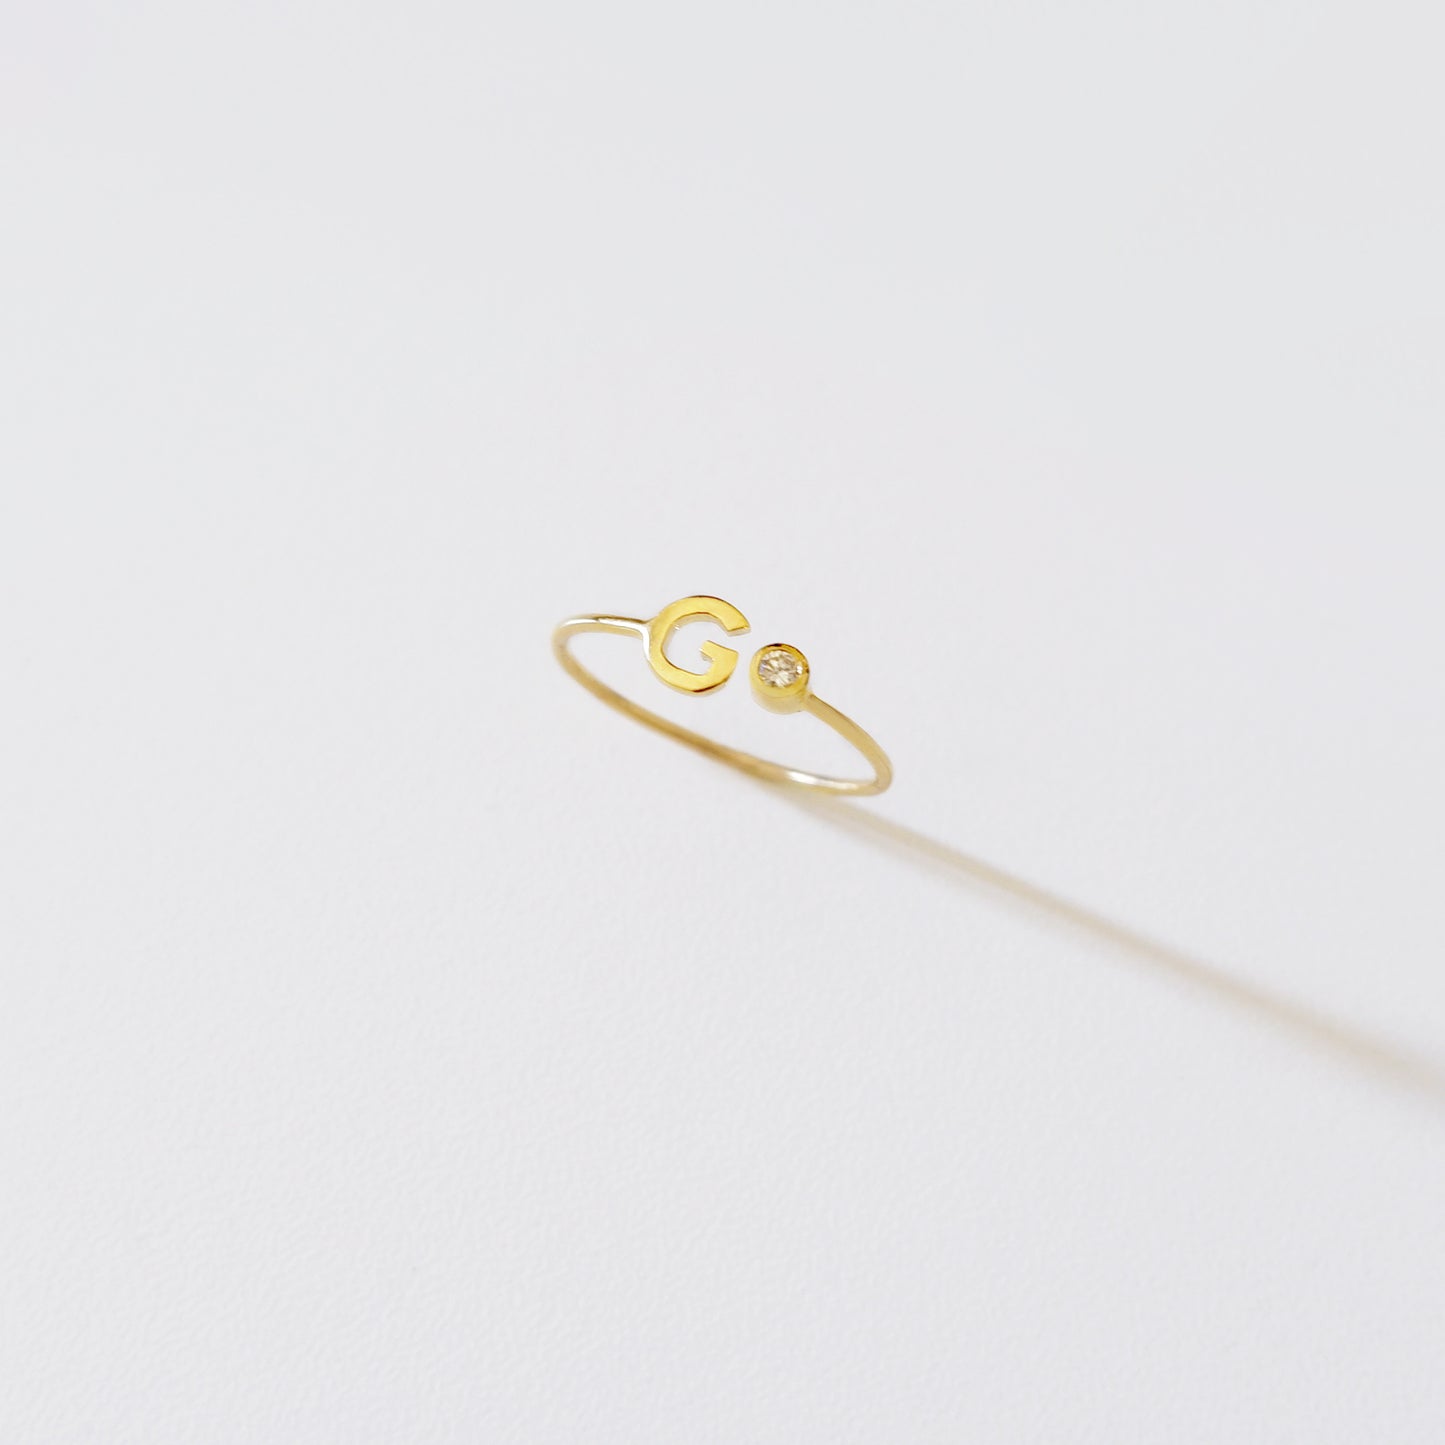 The Diamond Initial Ring in Solid Gold